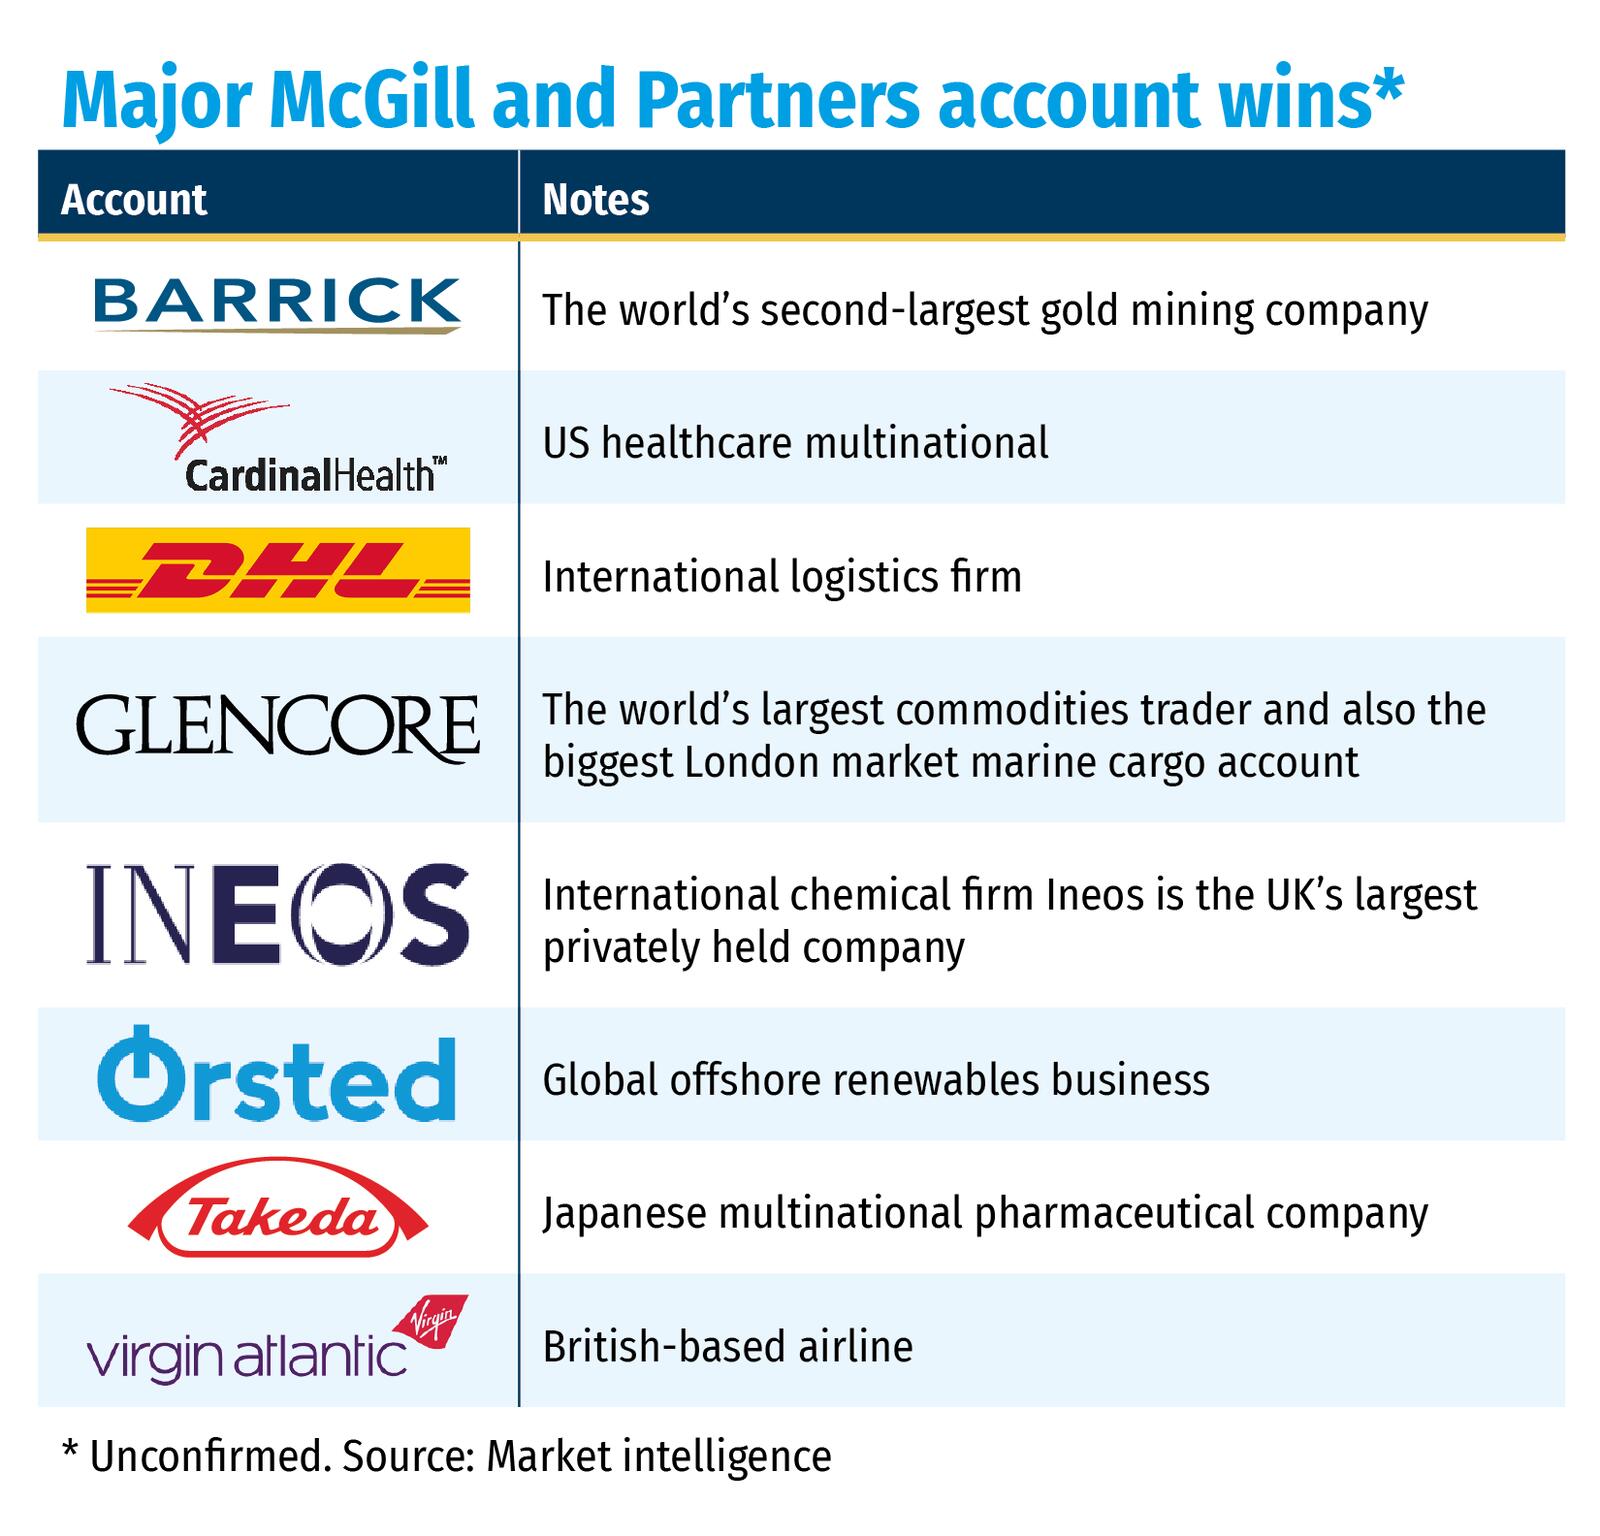 Major McGill and Partners account wins*